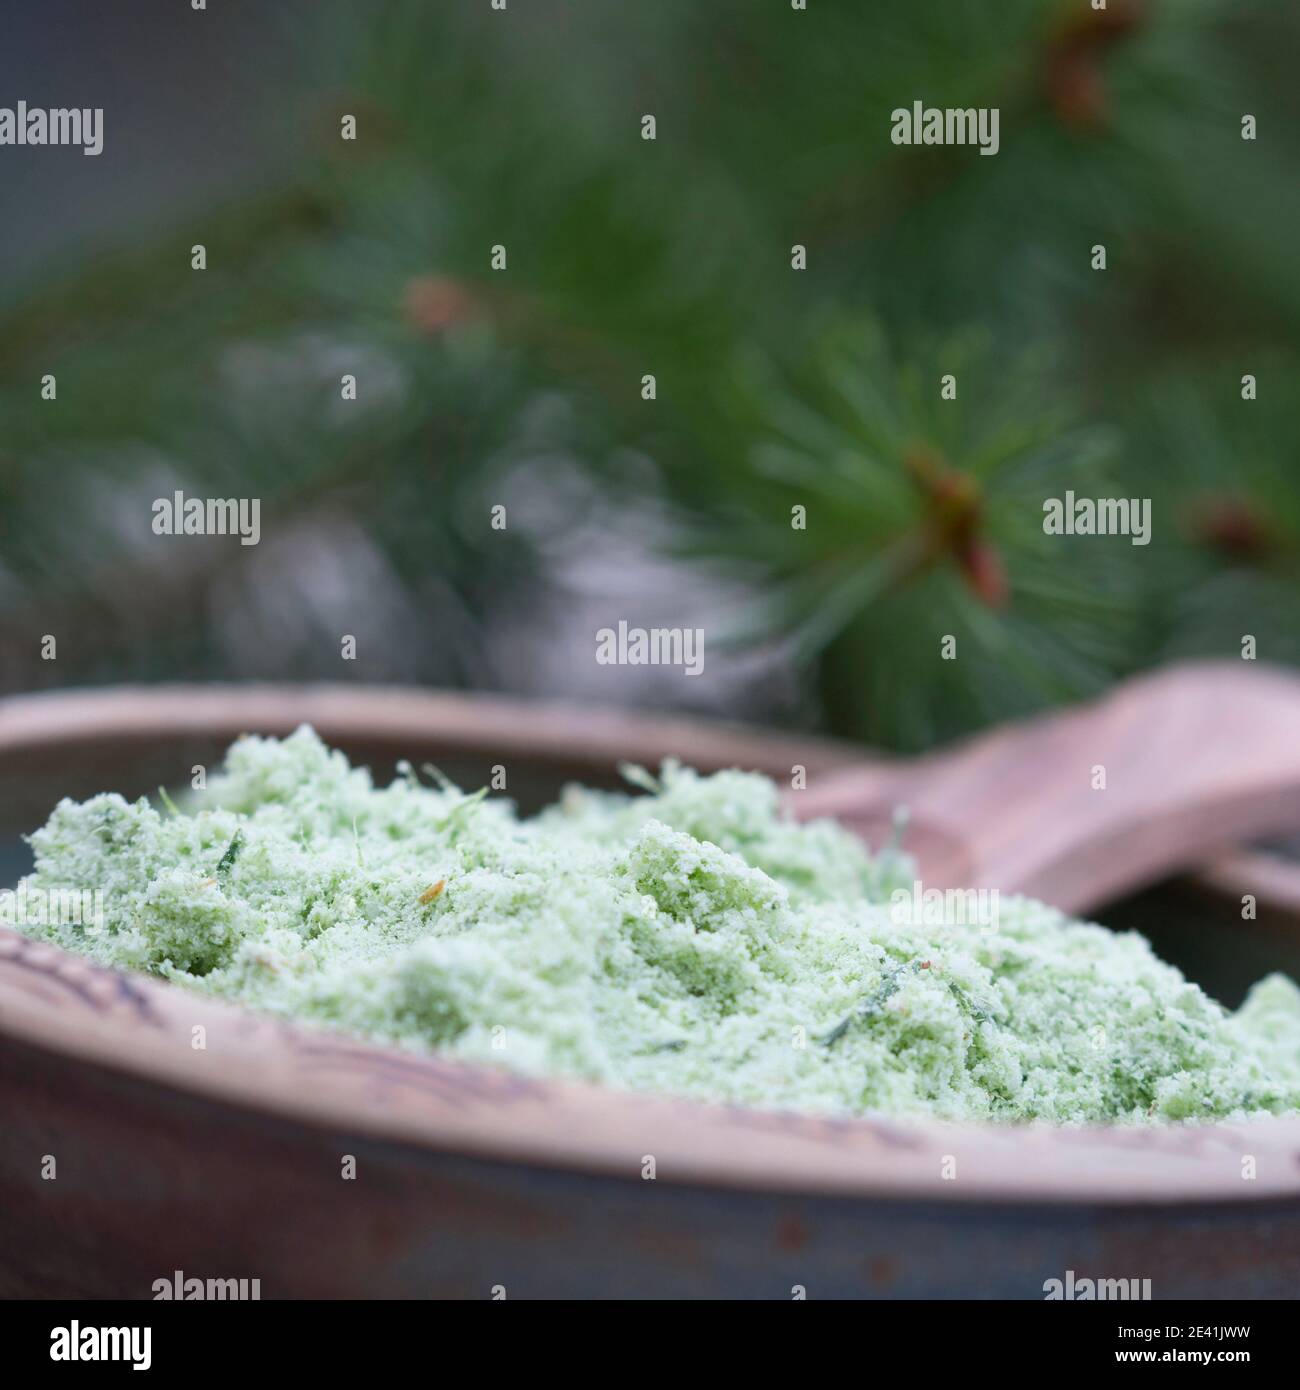 Norway spruce (Picea abies), selfmade spruce salt, Germany Stock Photo